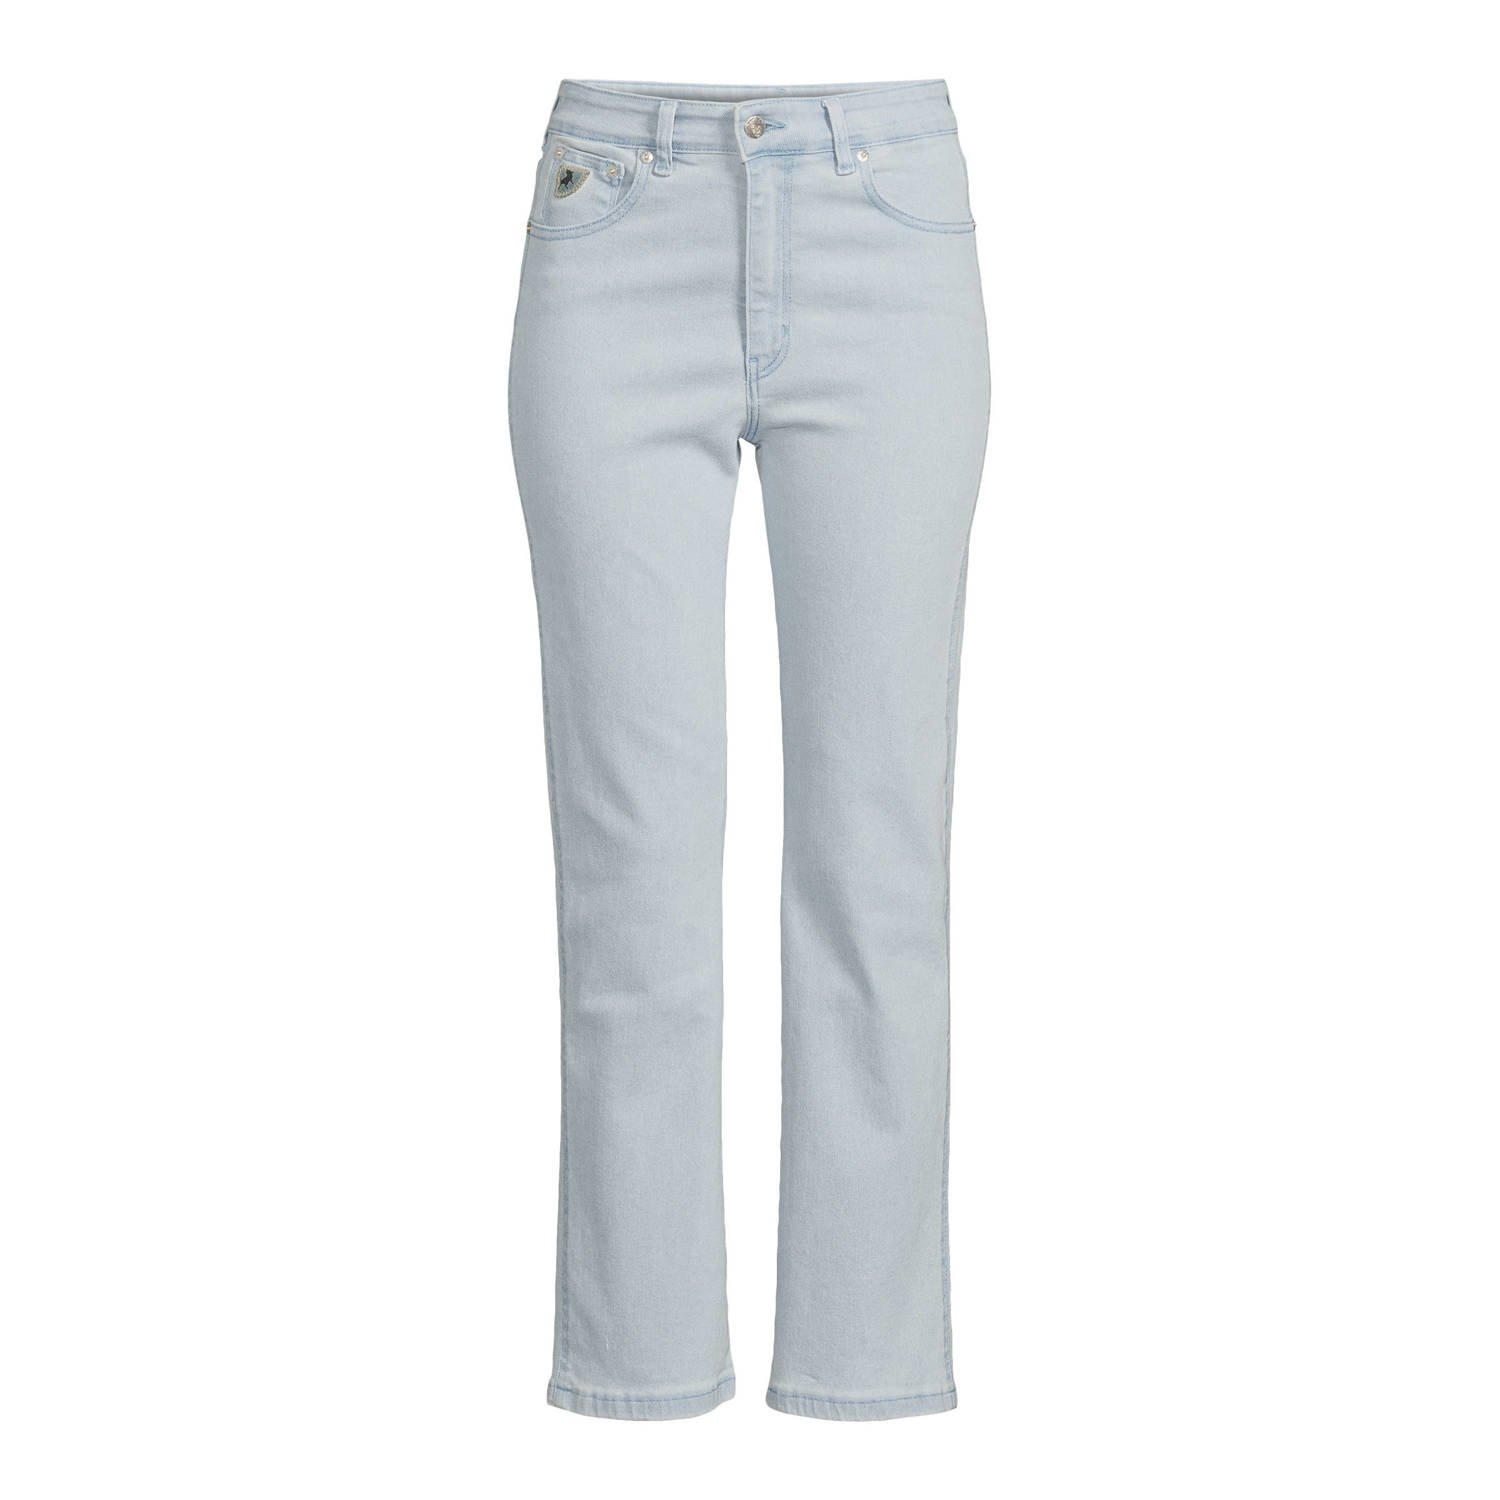 Lois cropped straight jeans Malena peper bleach